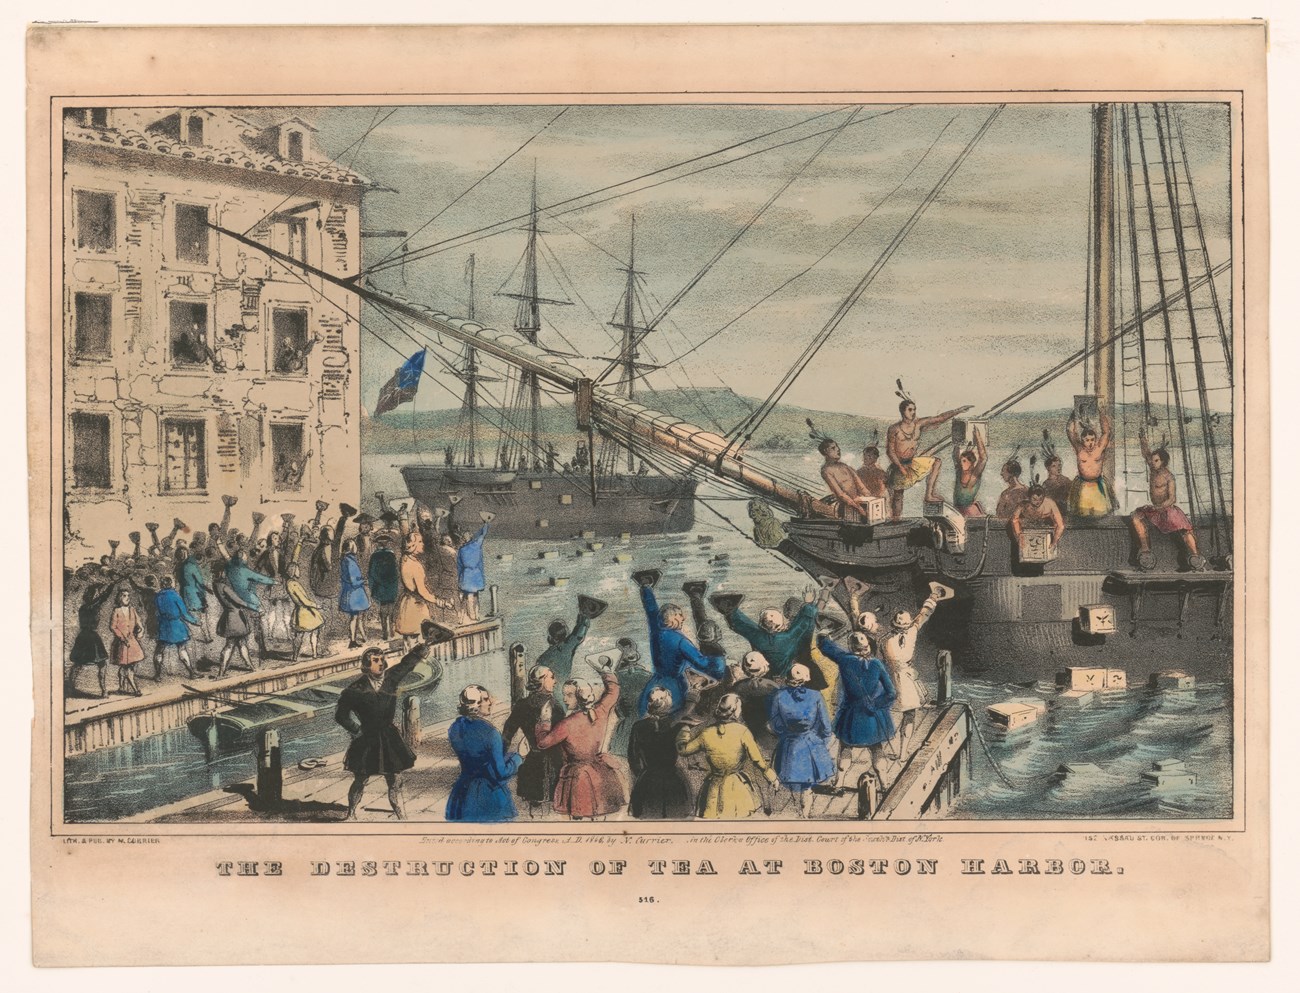 An 1846 sketch of the Boston Tea Party showing men dumping chests of tea from ships in Boston Harbor as citizens gather to watch